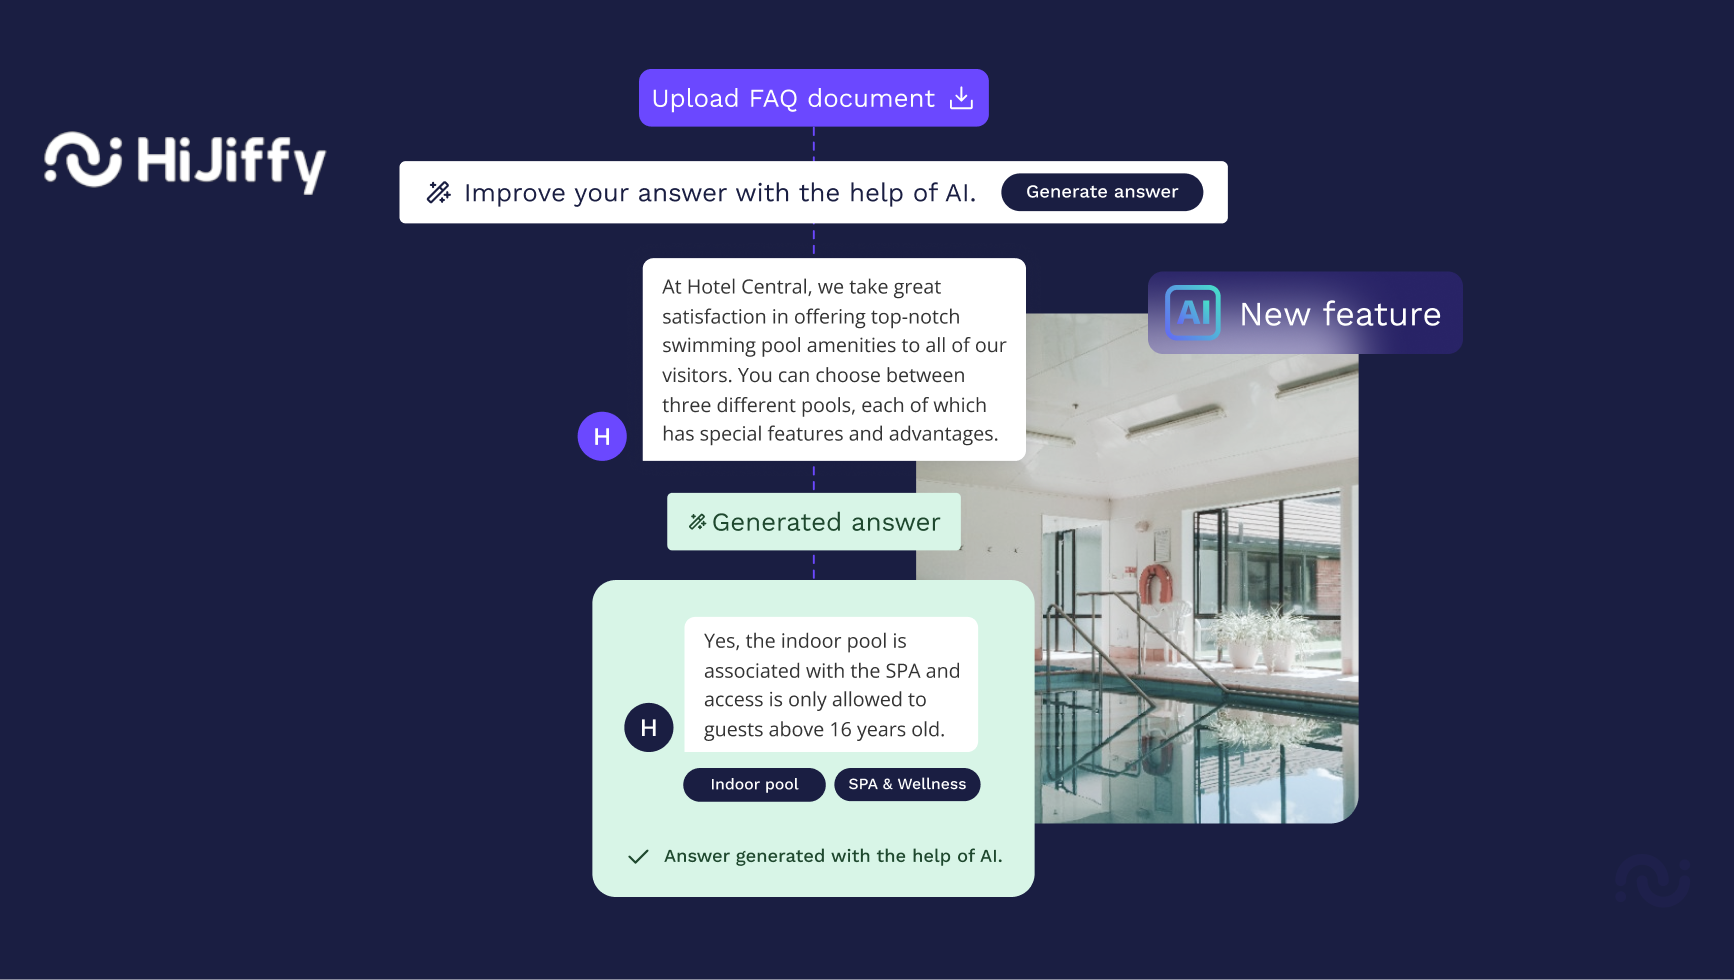 hijiffy image for press release on how deploying AI in hotels is now as simple as uploading one document